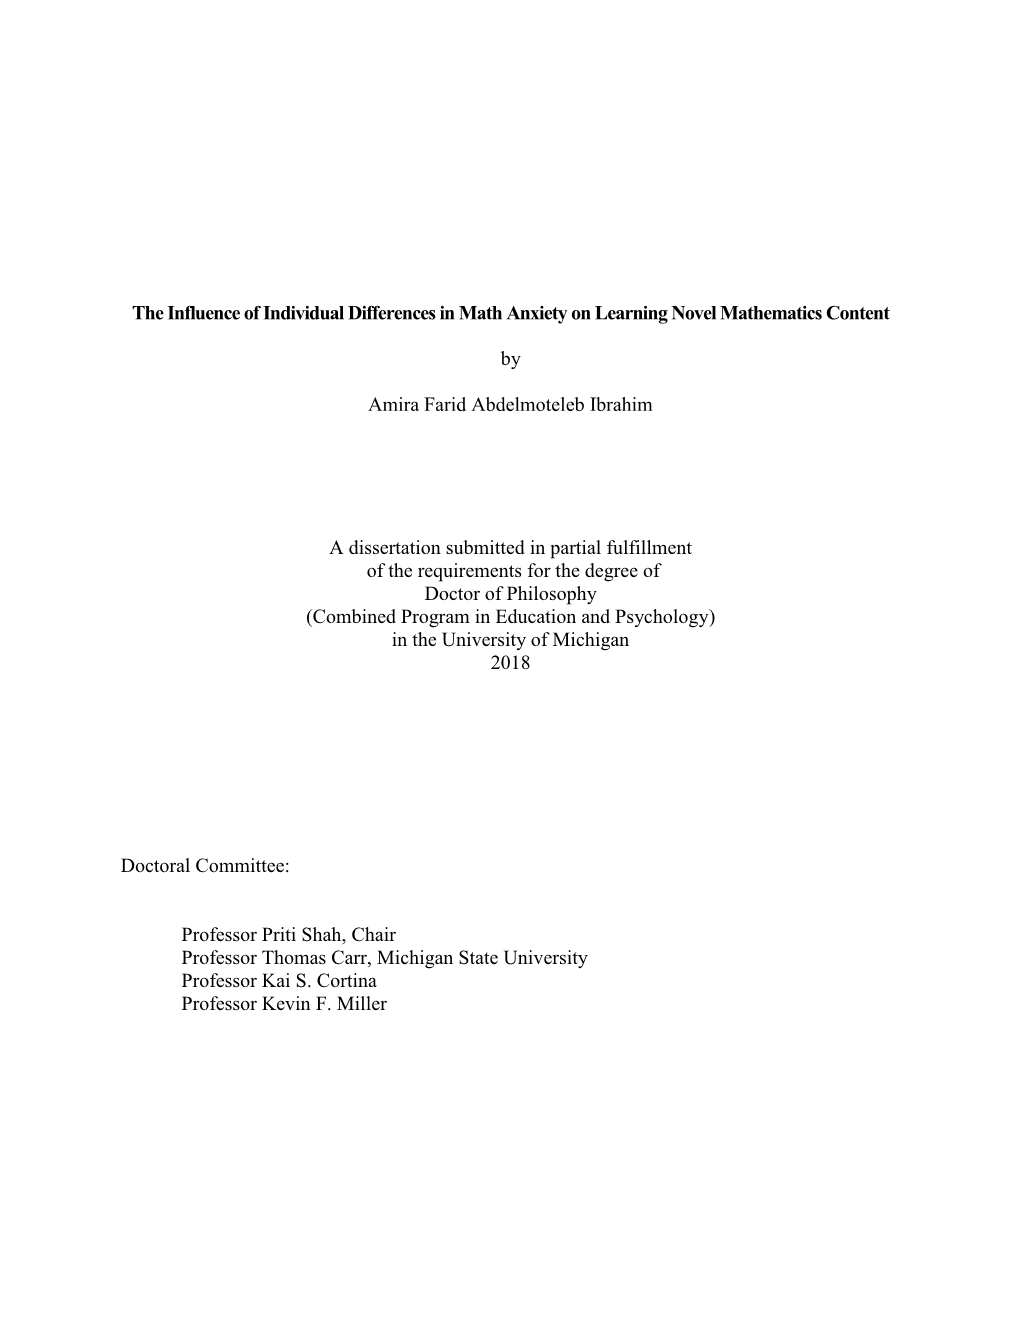 The Influence of Individual Differences in Math Anxiety on Learning Novel Mathematics Content